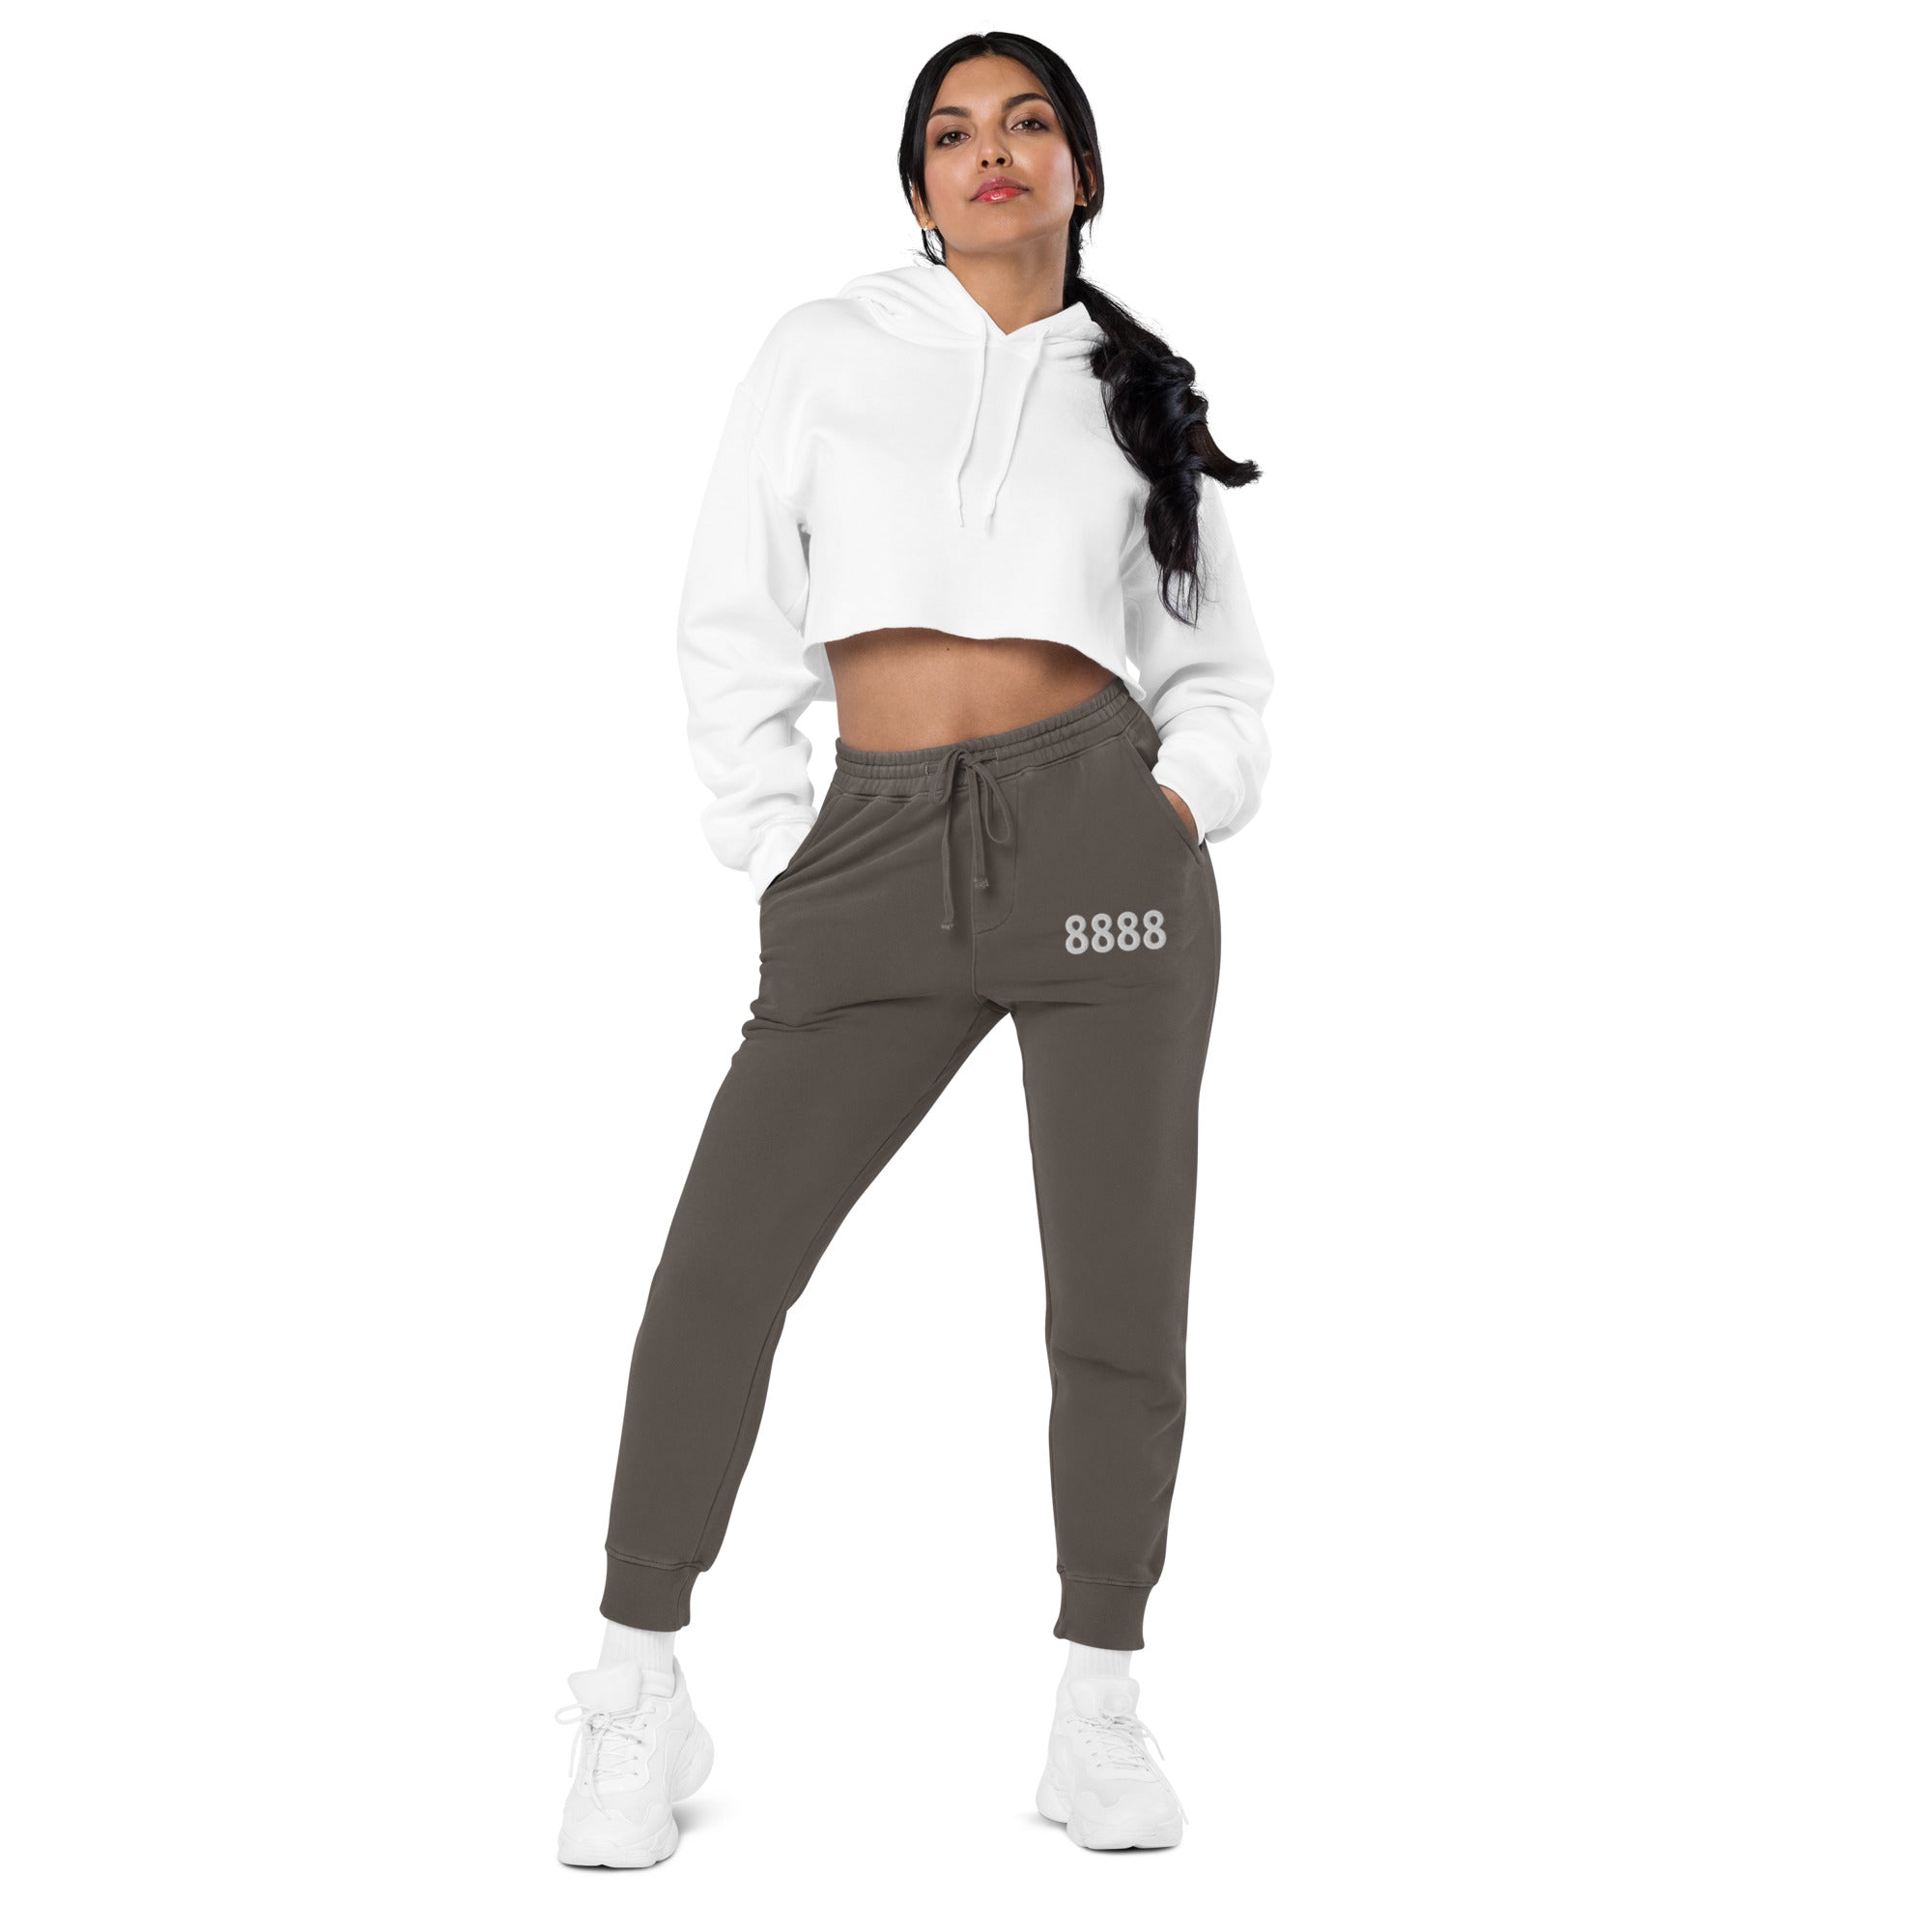 PA Angel Athleisure Pants With Correct Logo Unisex Designer Short  Sweatpants For Men And Women From Hoodie2388, $43.49